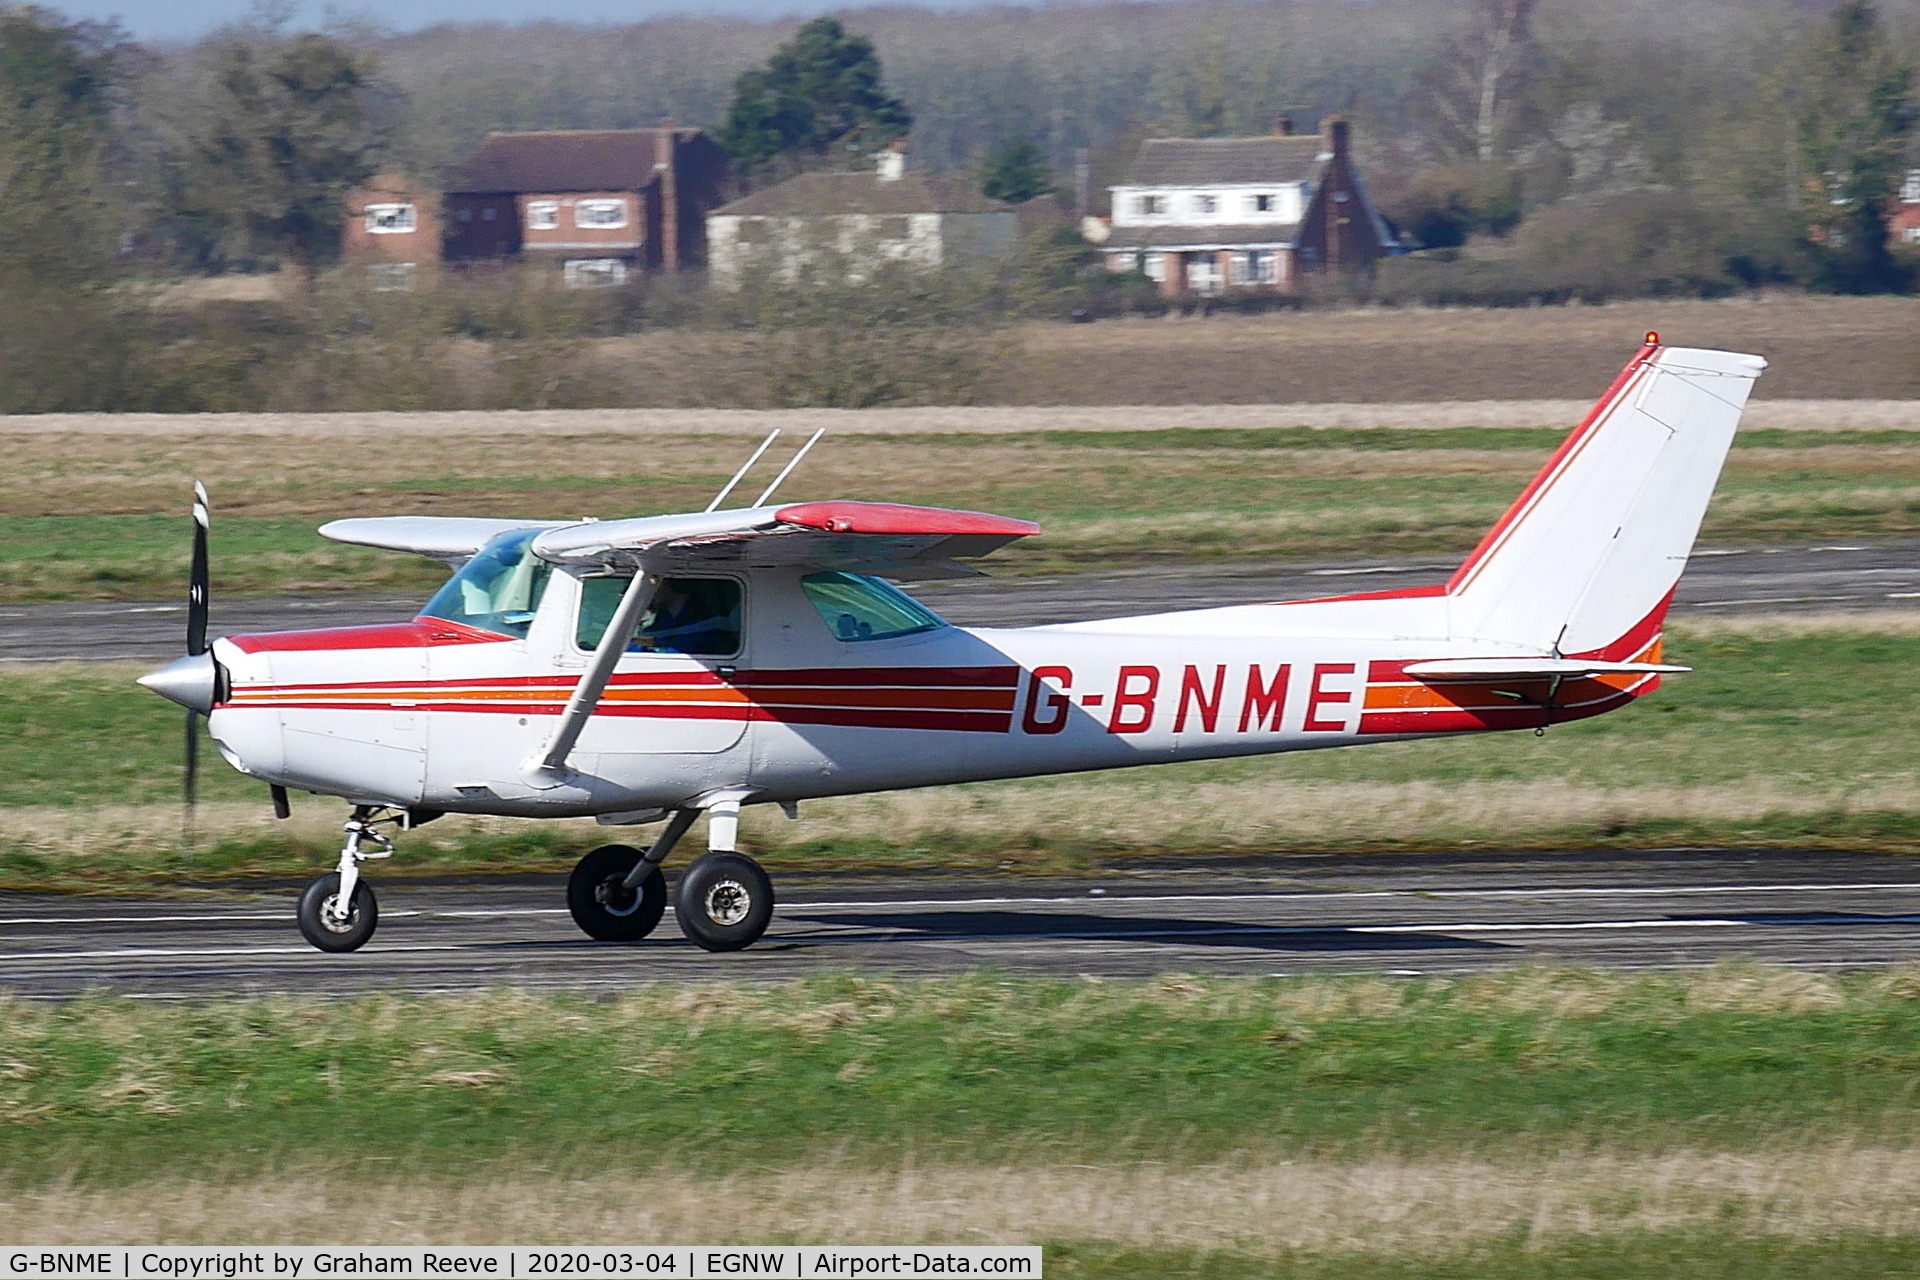 G-BNME, 1981 Cessna 152 C/N 152-84888, Departing from Wickenby.